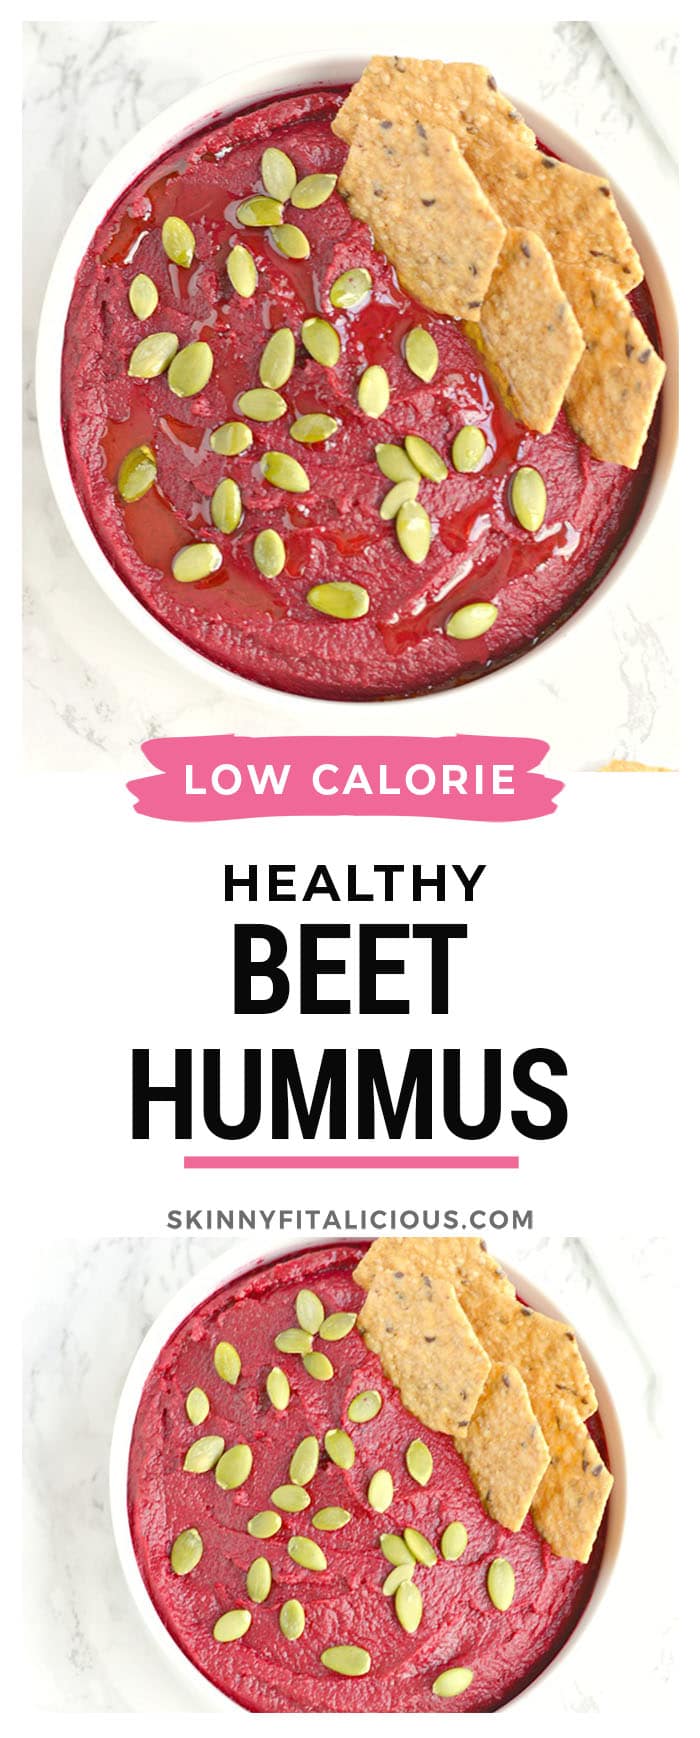 Creamy White Bean Beet Hummus made with 6 healthy ingredients and a pumpkin surprise. A hearty dip that's remarkably delicious, tastes nothing like beets and sure to be the star of the party! Vegan + Gluten Free + Low Calorie